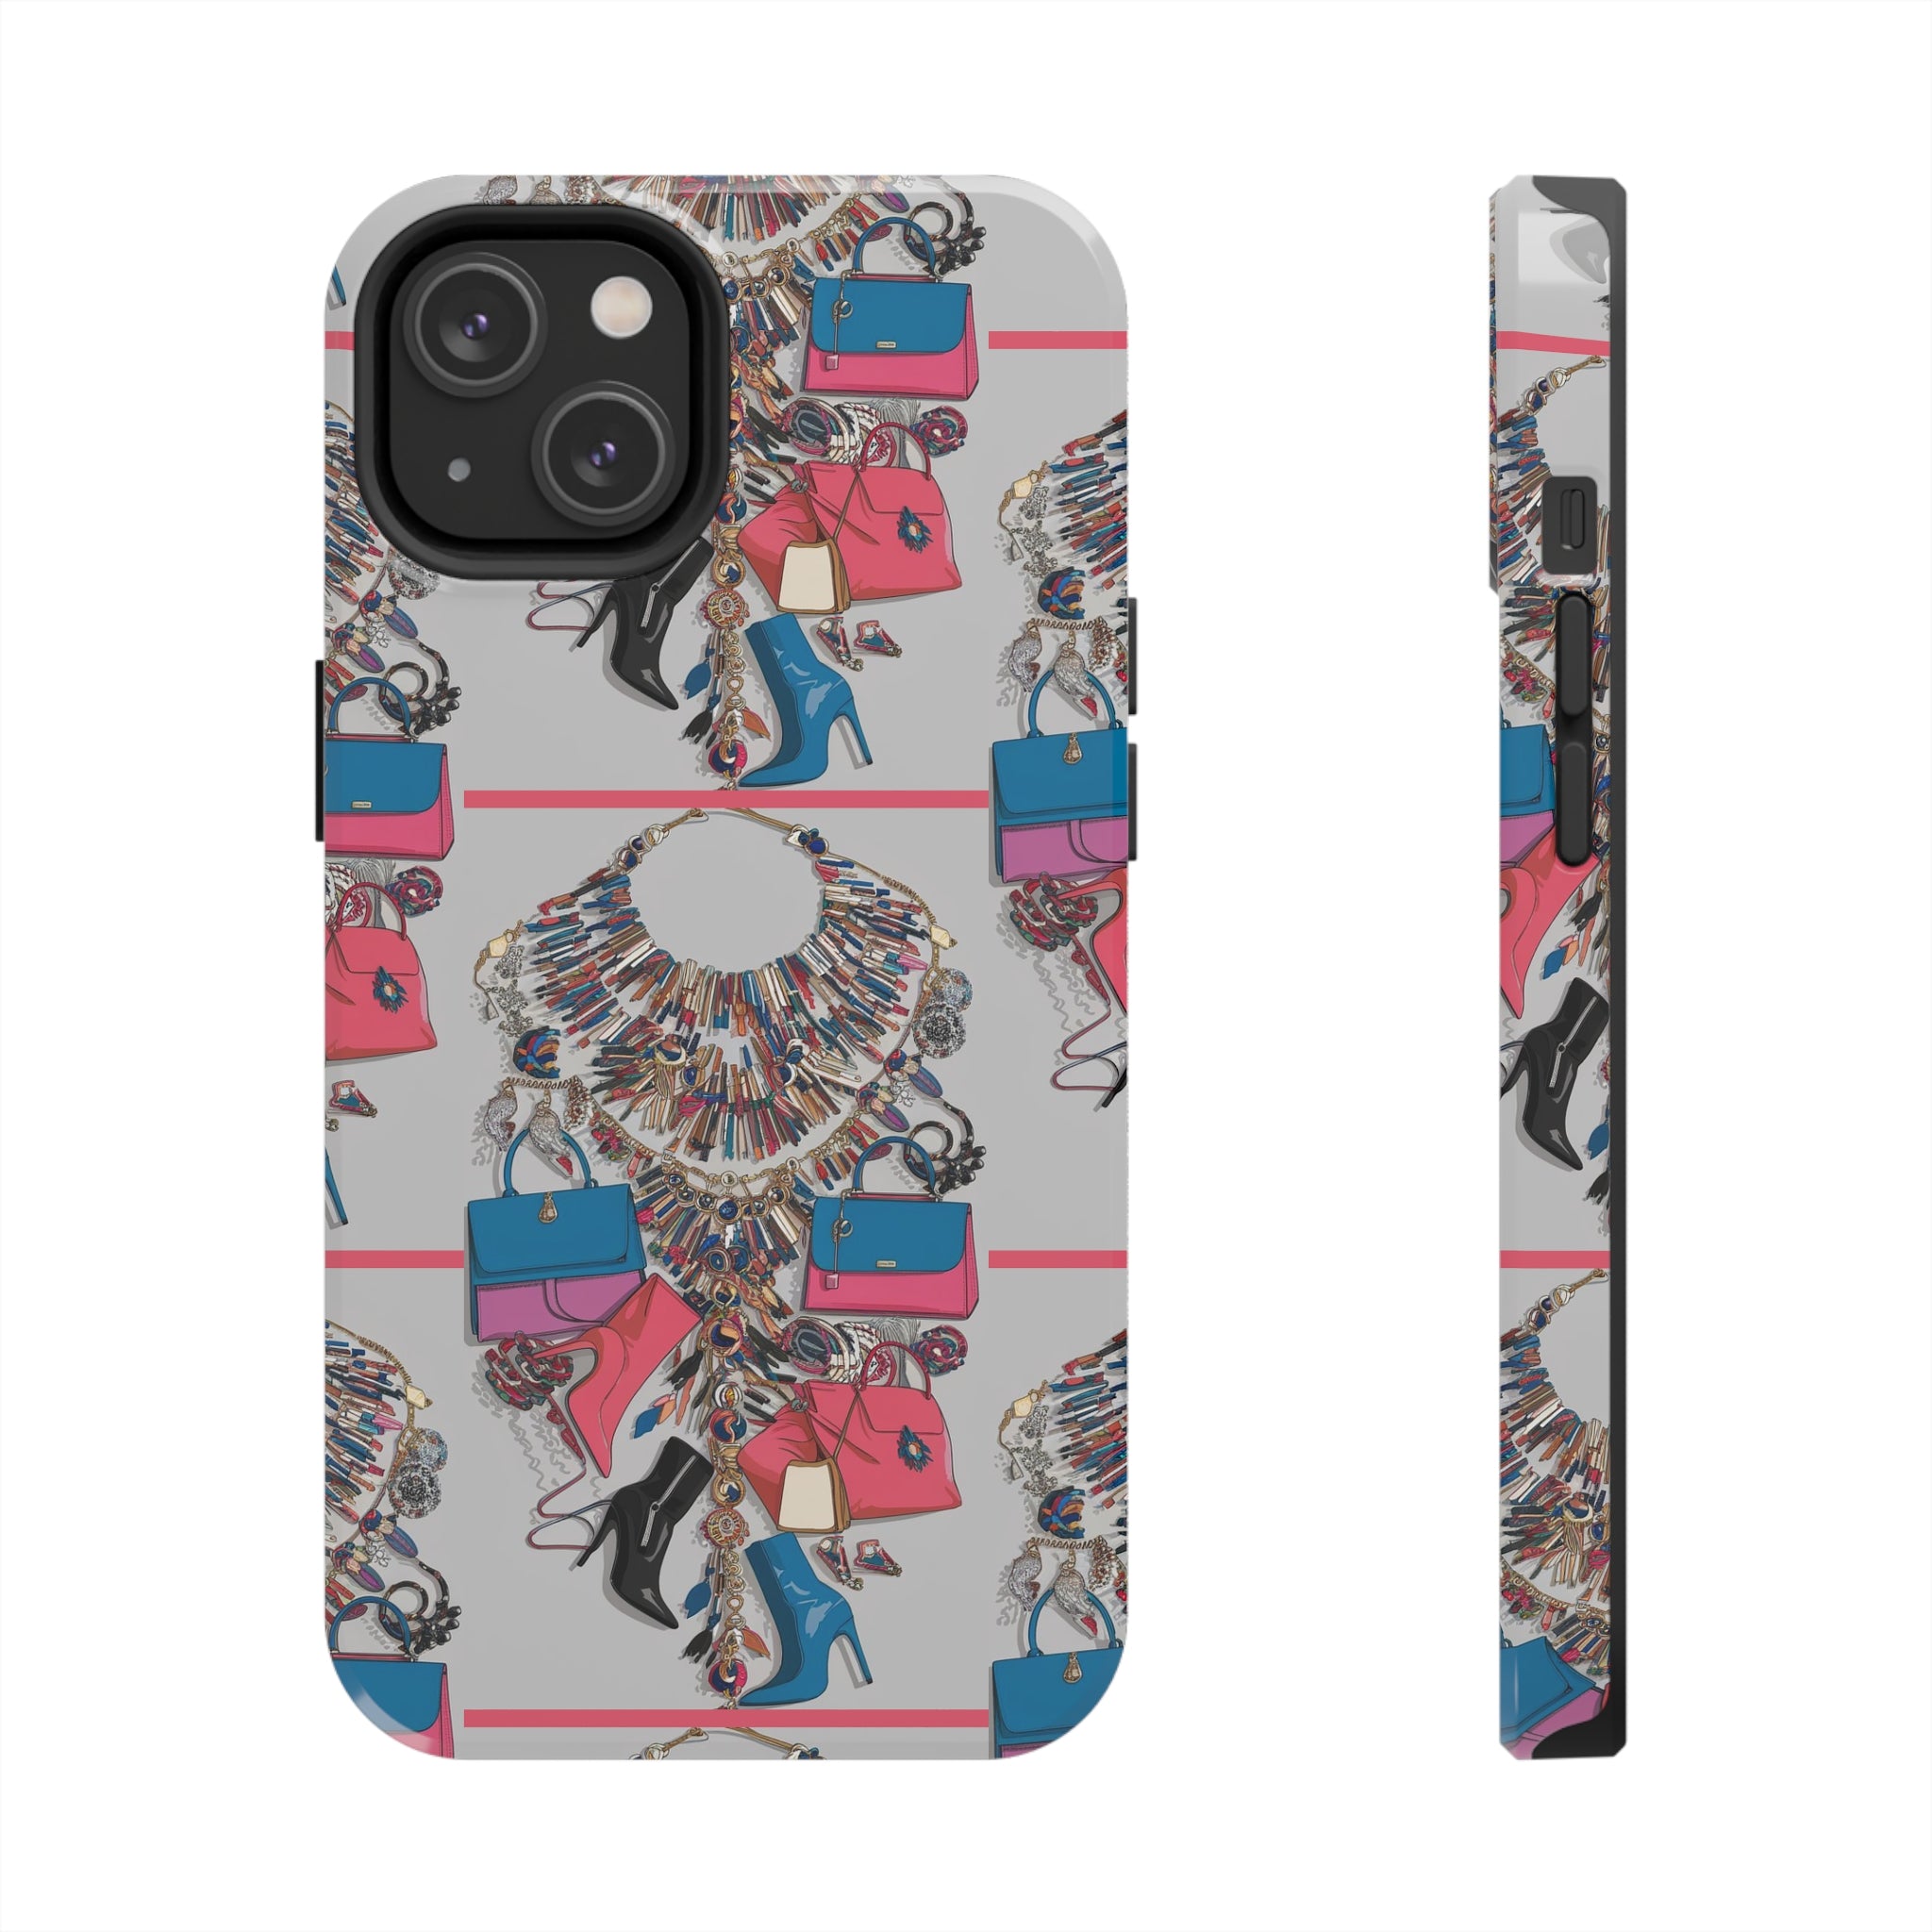 Couture - Tough Phone Cases